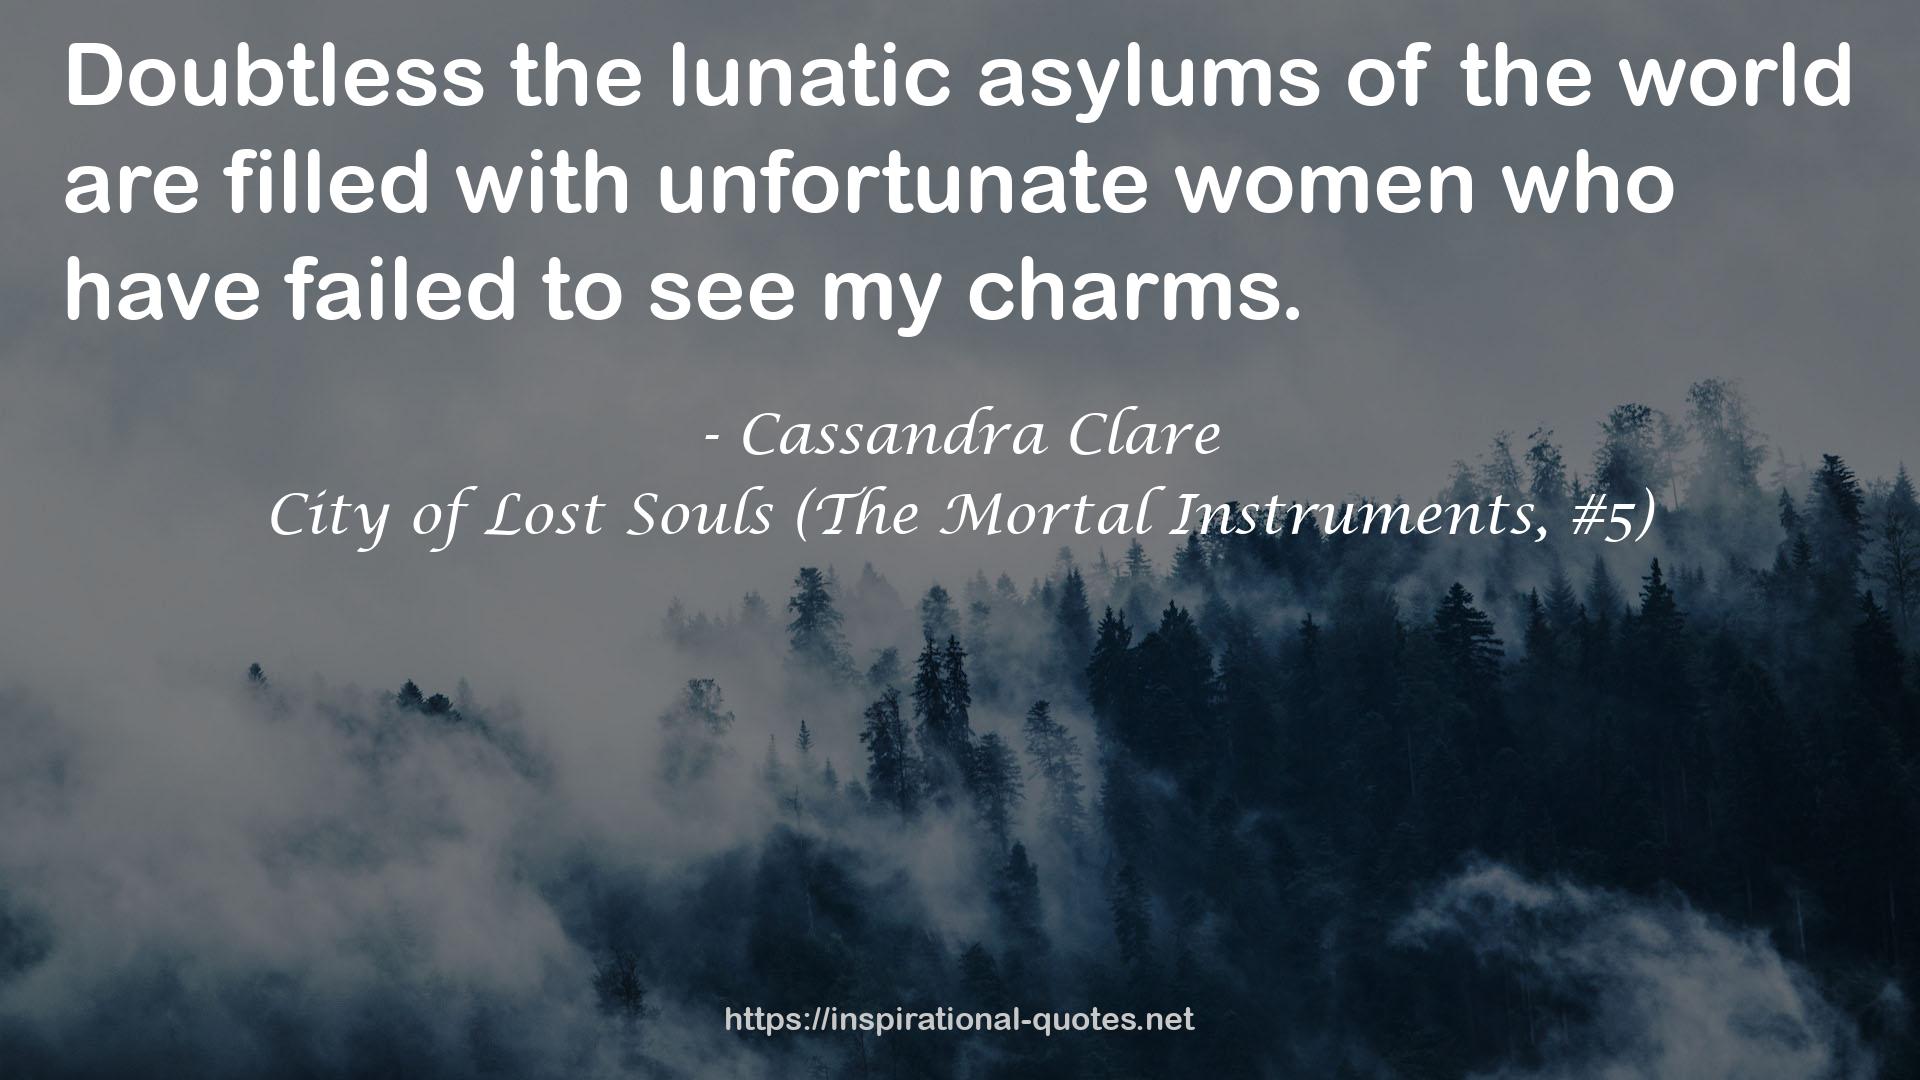 City of Lost Souls (The Mortal Instruments, #5) QUOTES